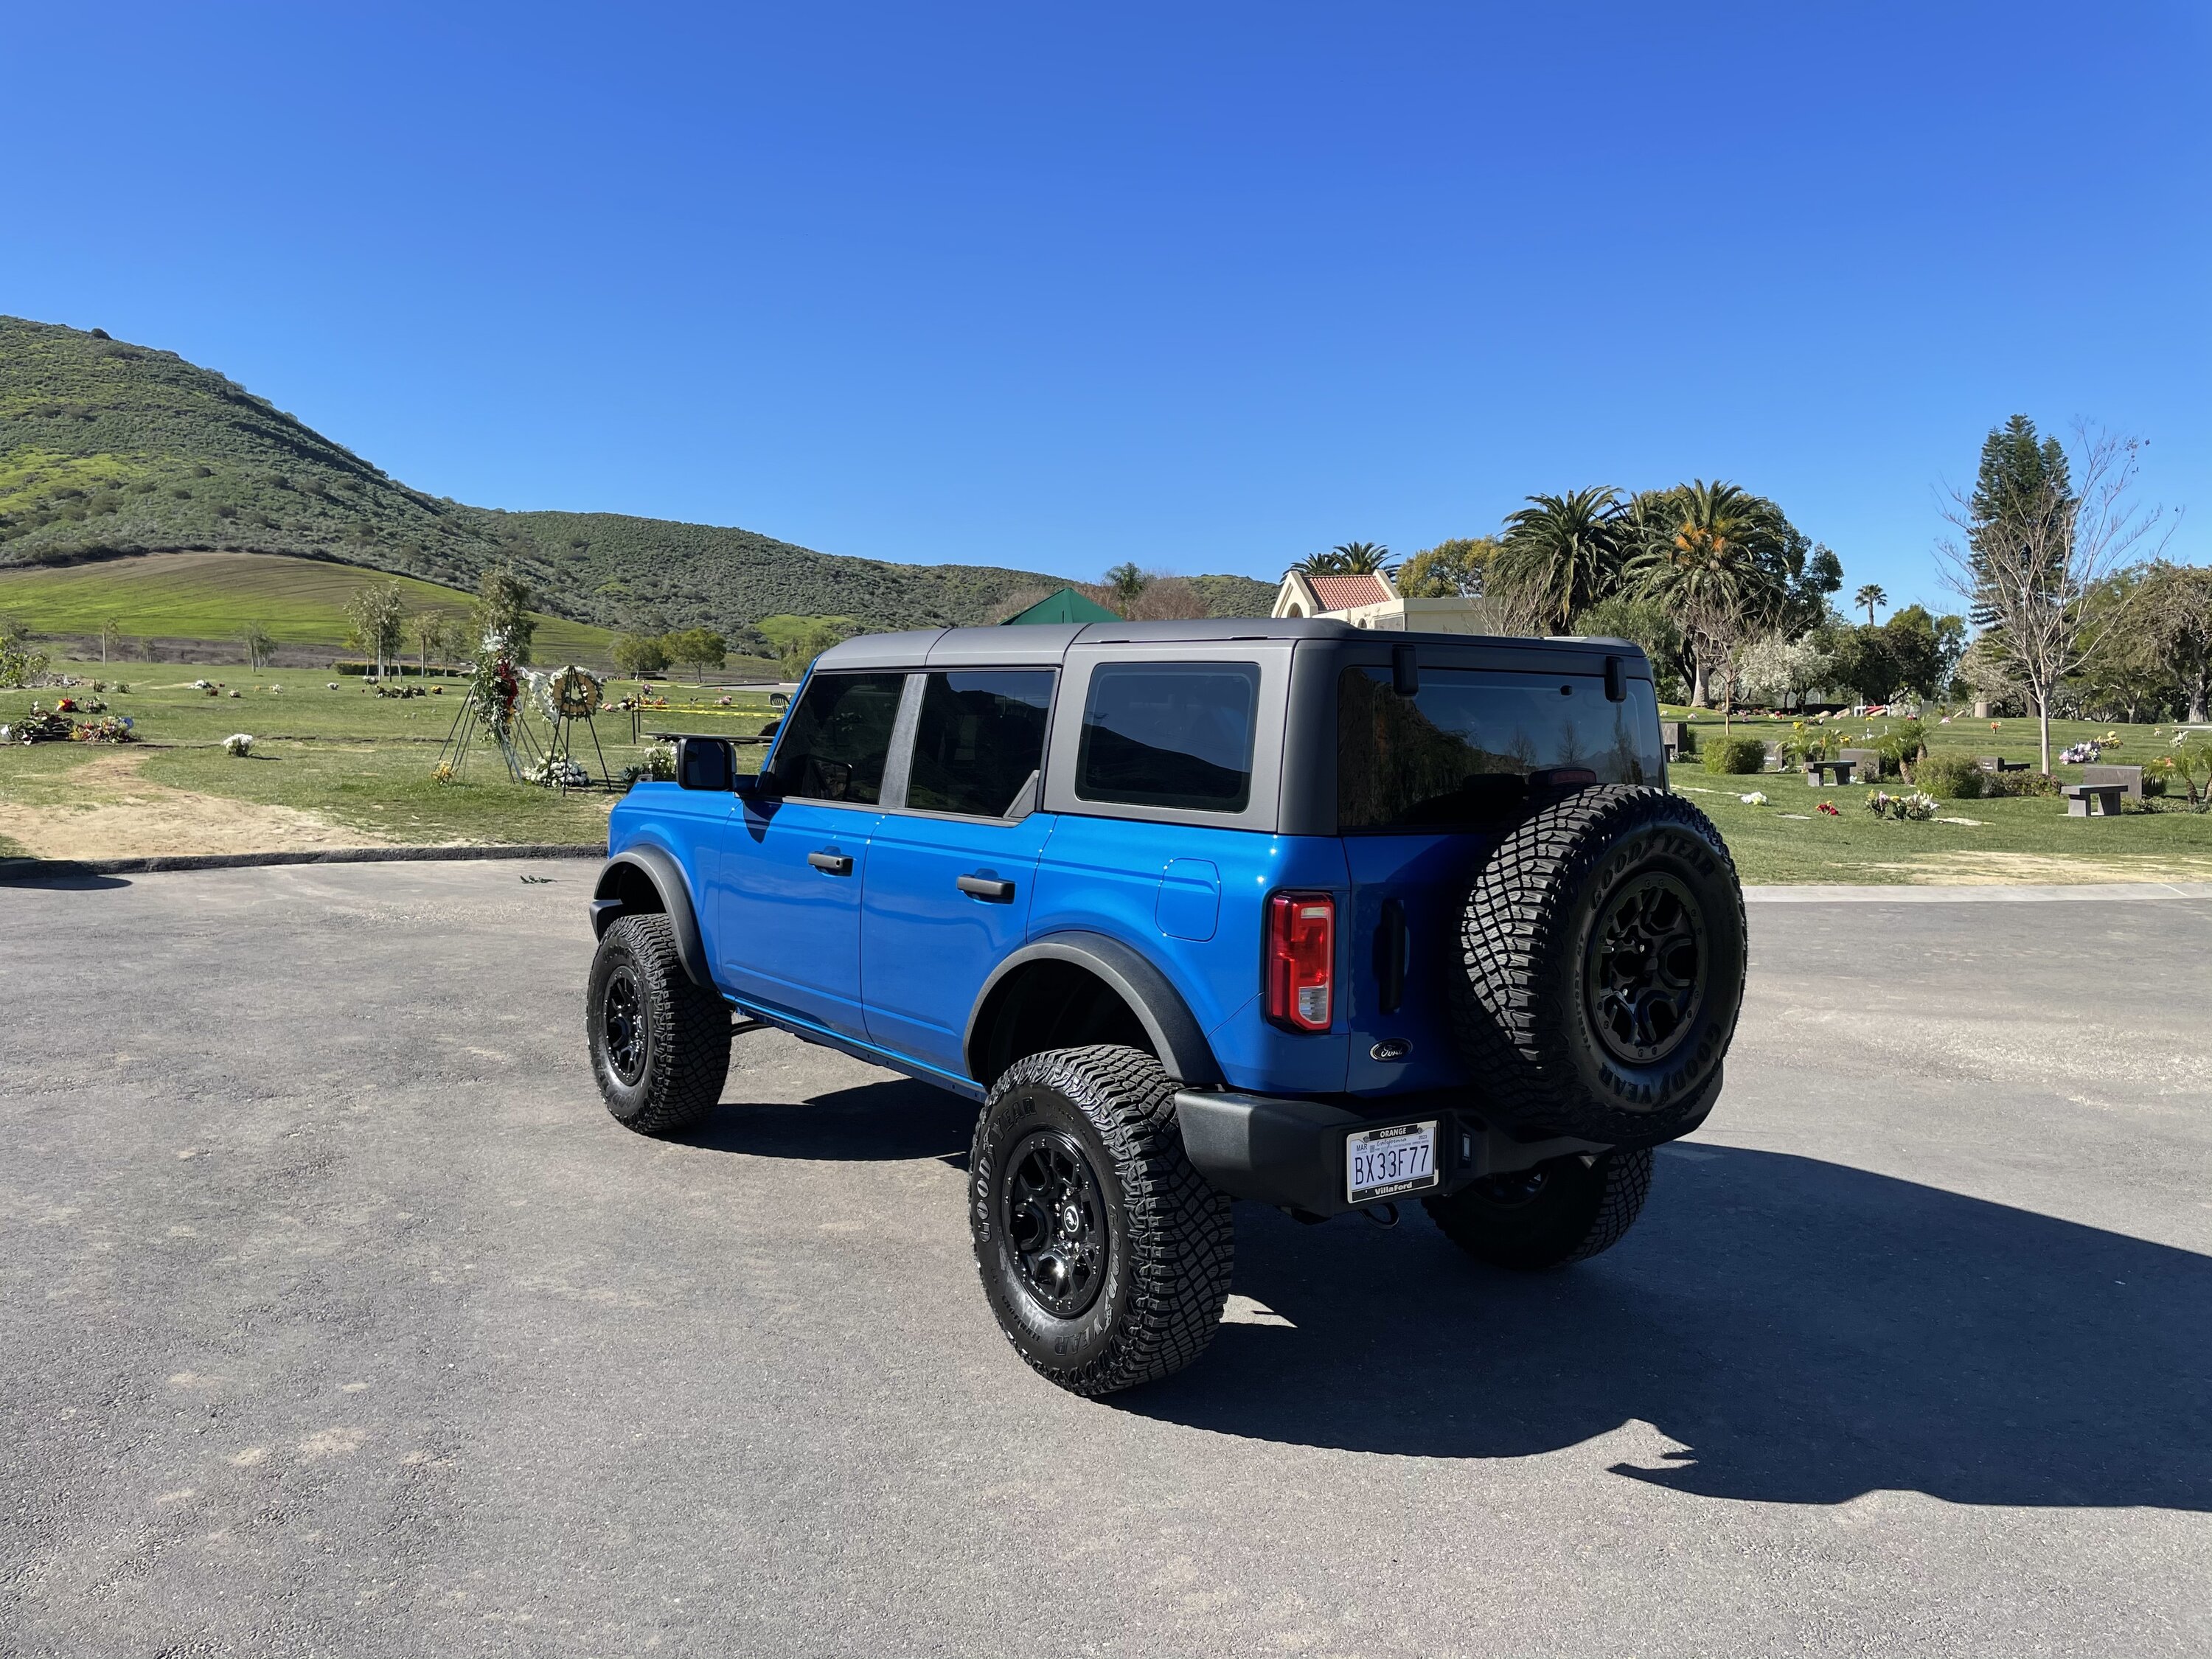 Ford Bronco Brand new 2022 Ford Bronco 2.7 V-6 lifted 4 door, $59k or BO 40077BE0-C4D4-4783-B4D2-D035B965163D